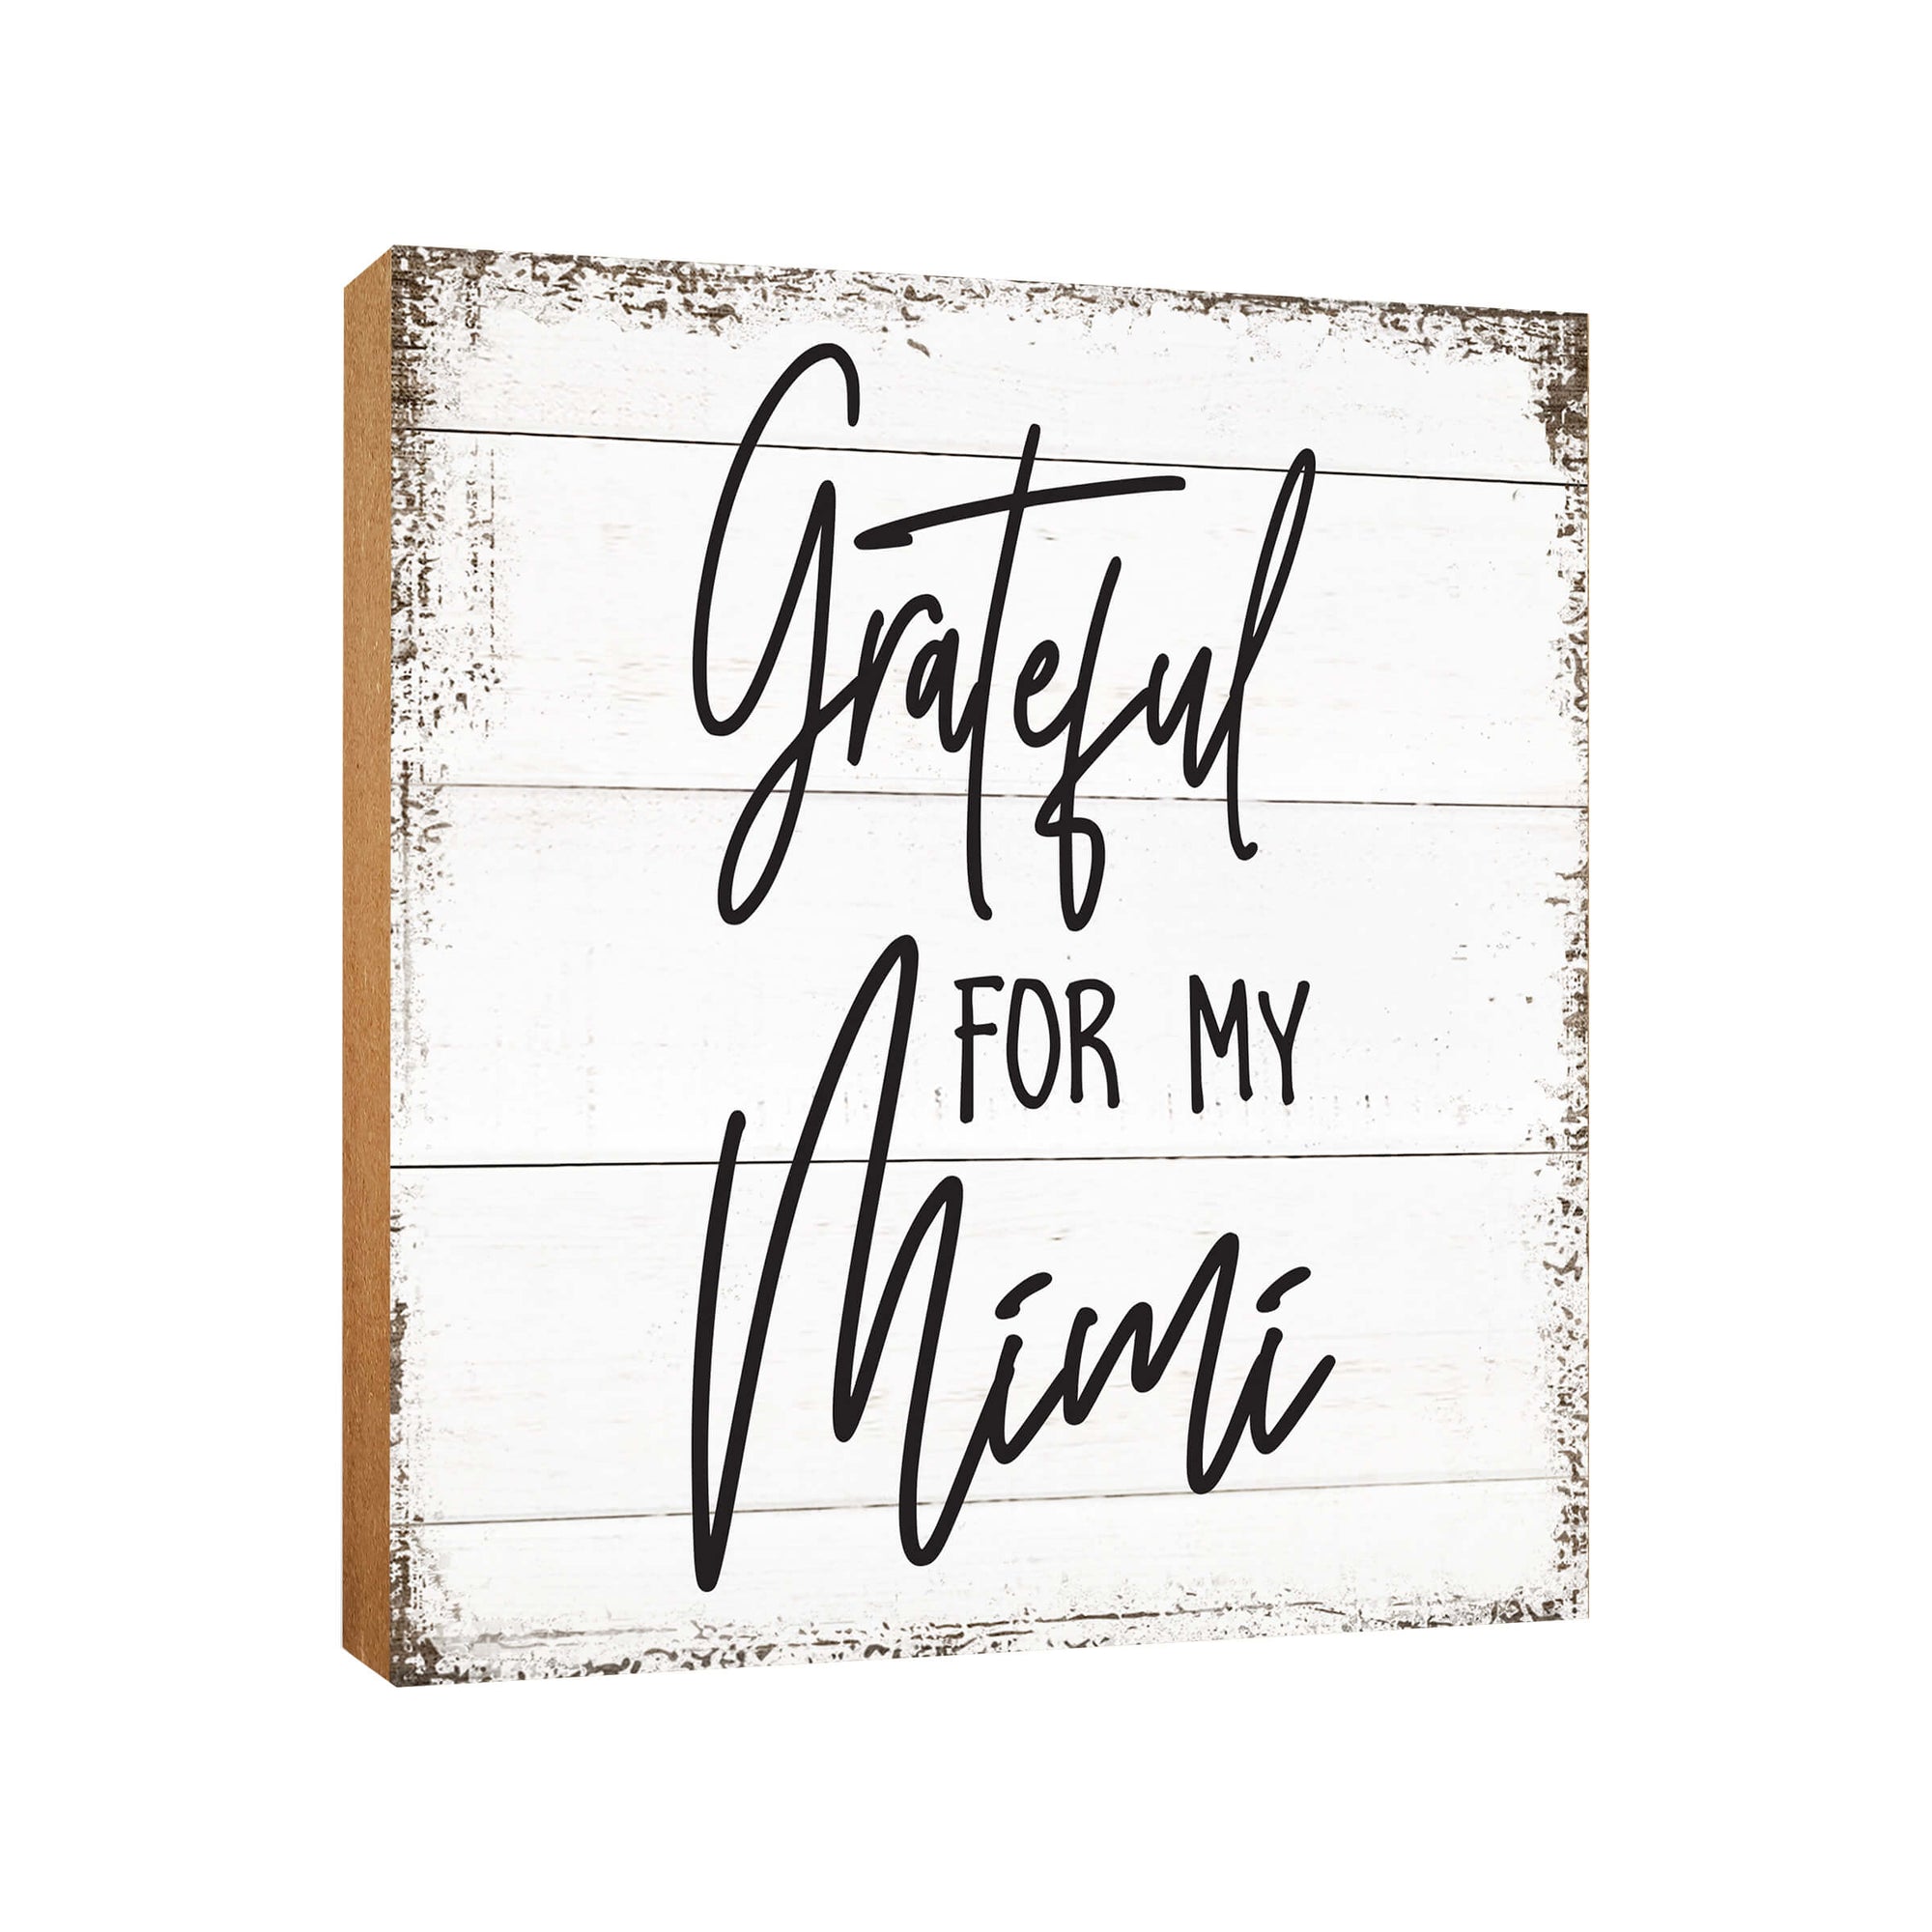 LifeSong Milestones Handcrafted Wooden Shelf Decor - Unique Mother's Day Gift for Grandmother